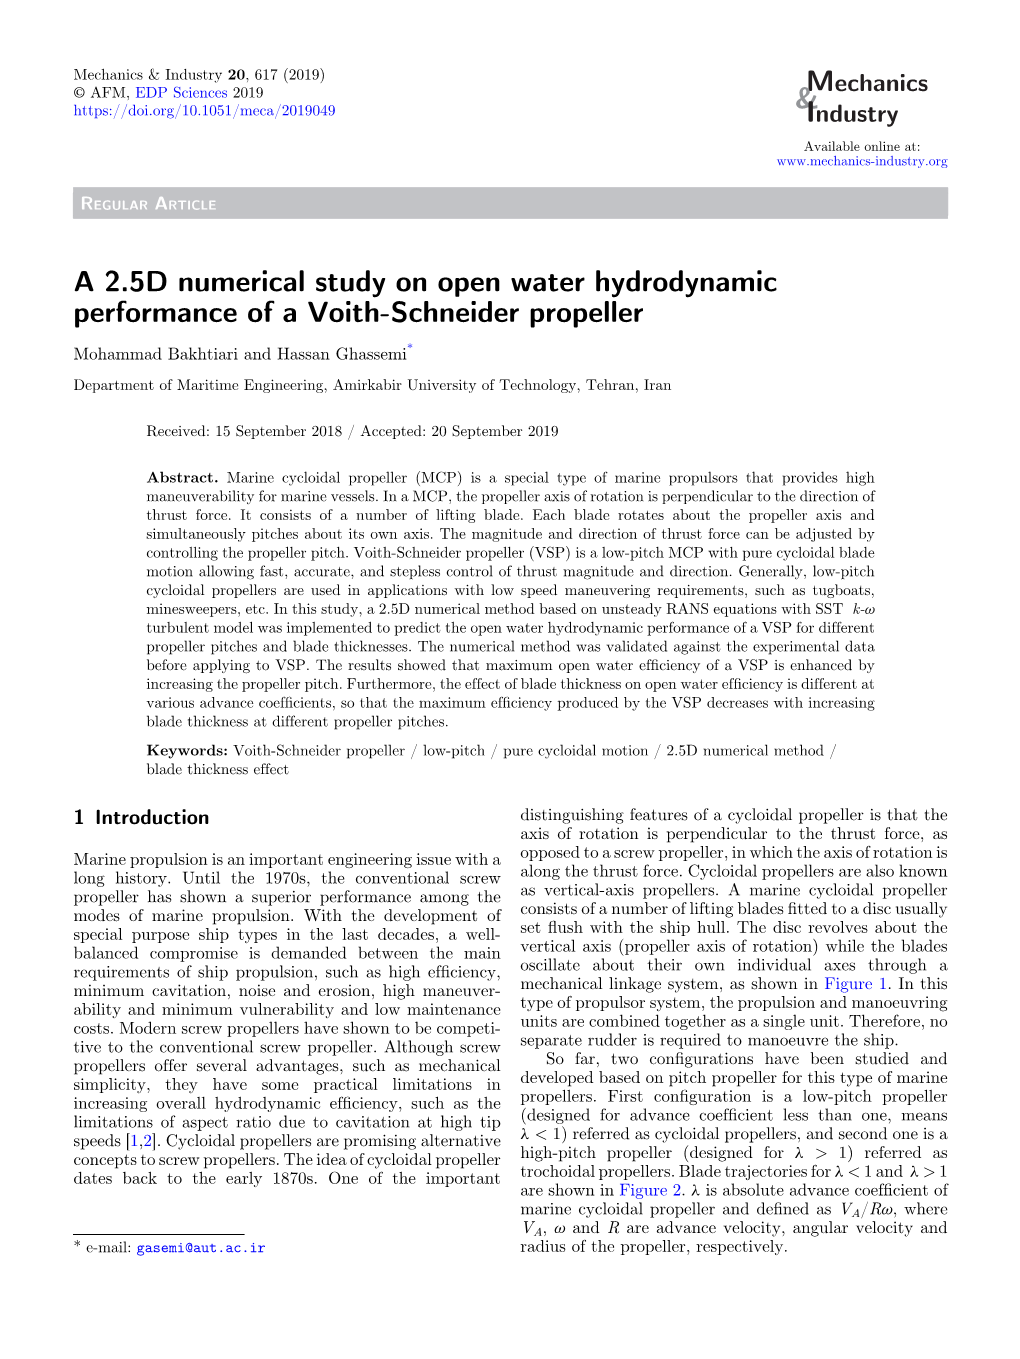 A 2.5D Numerical Study on Open Water Hydrodynamic Performance of a Voith-Schneider Propeller